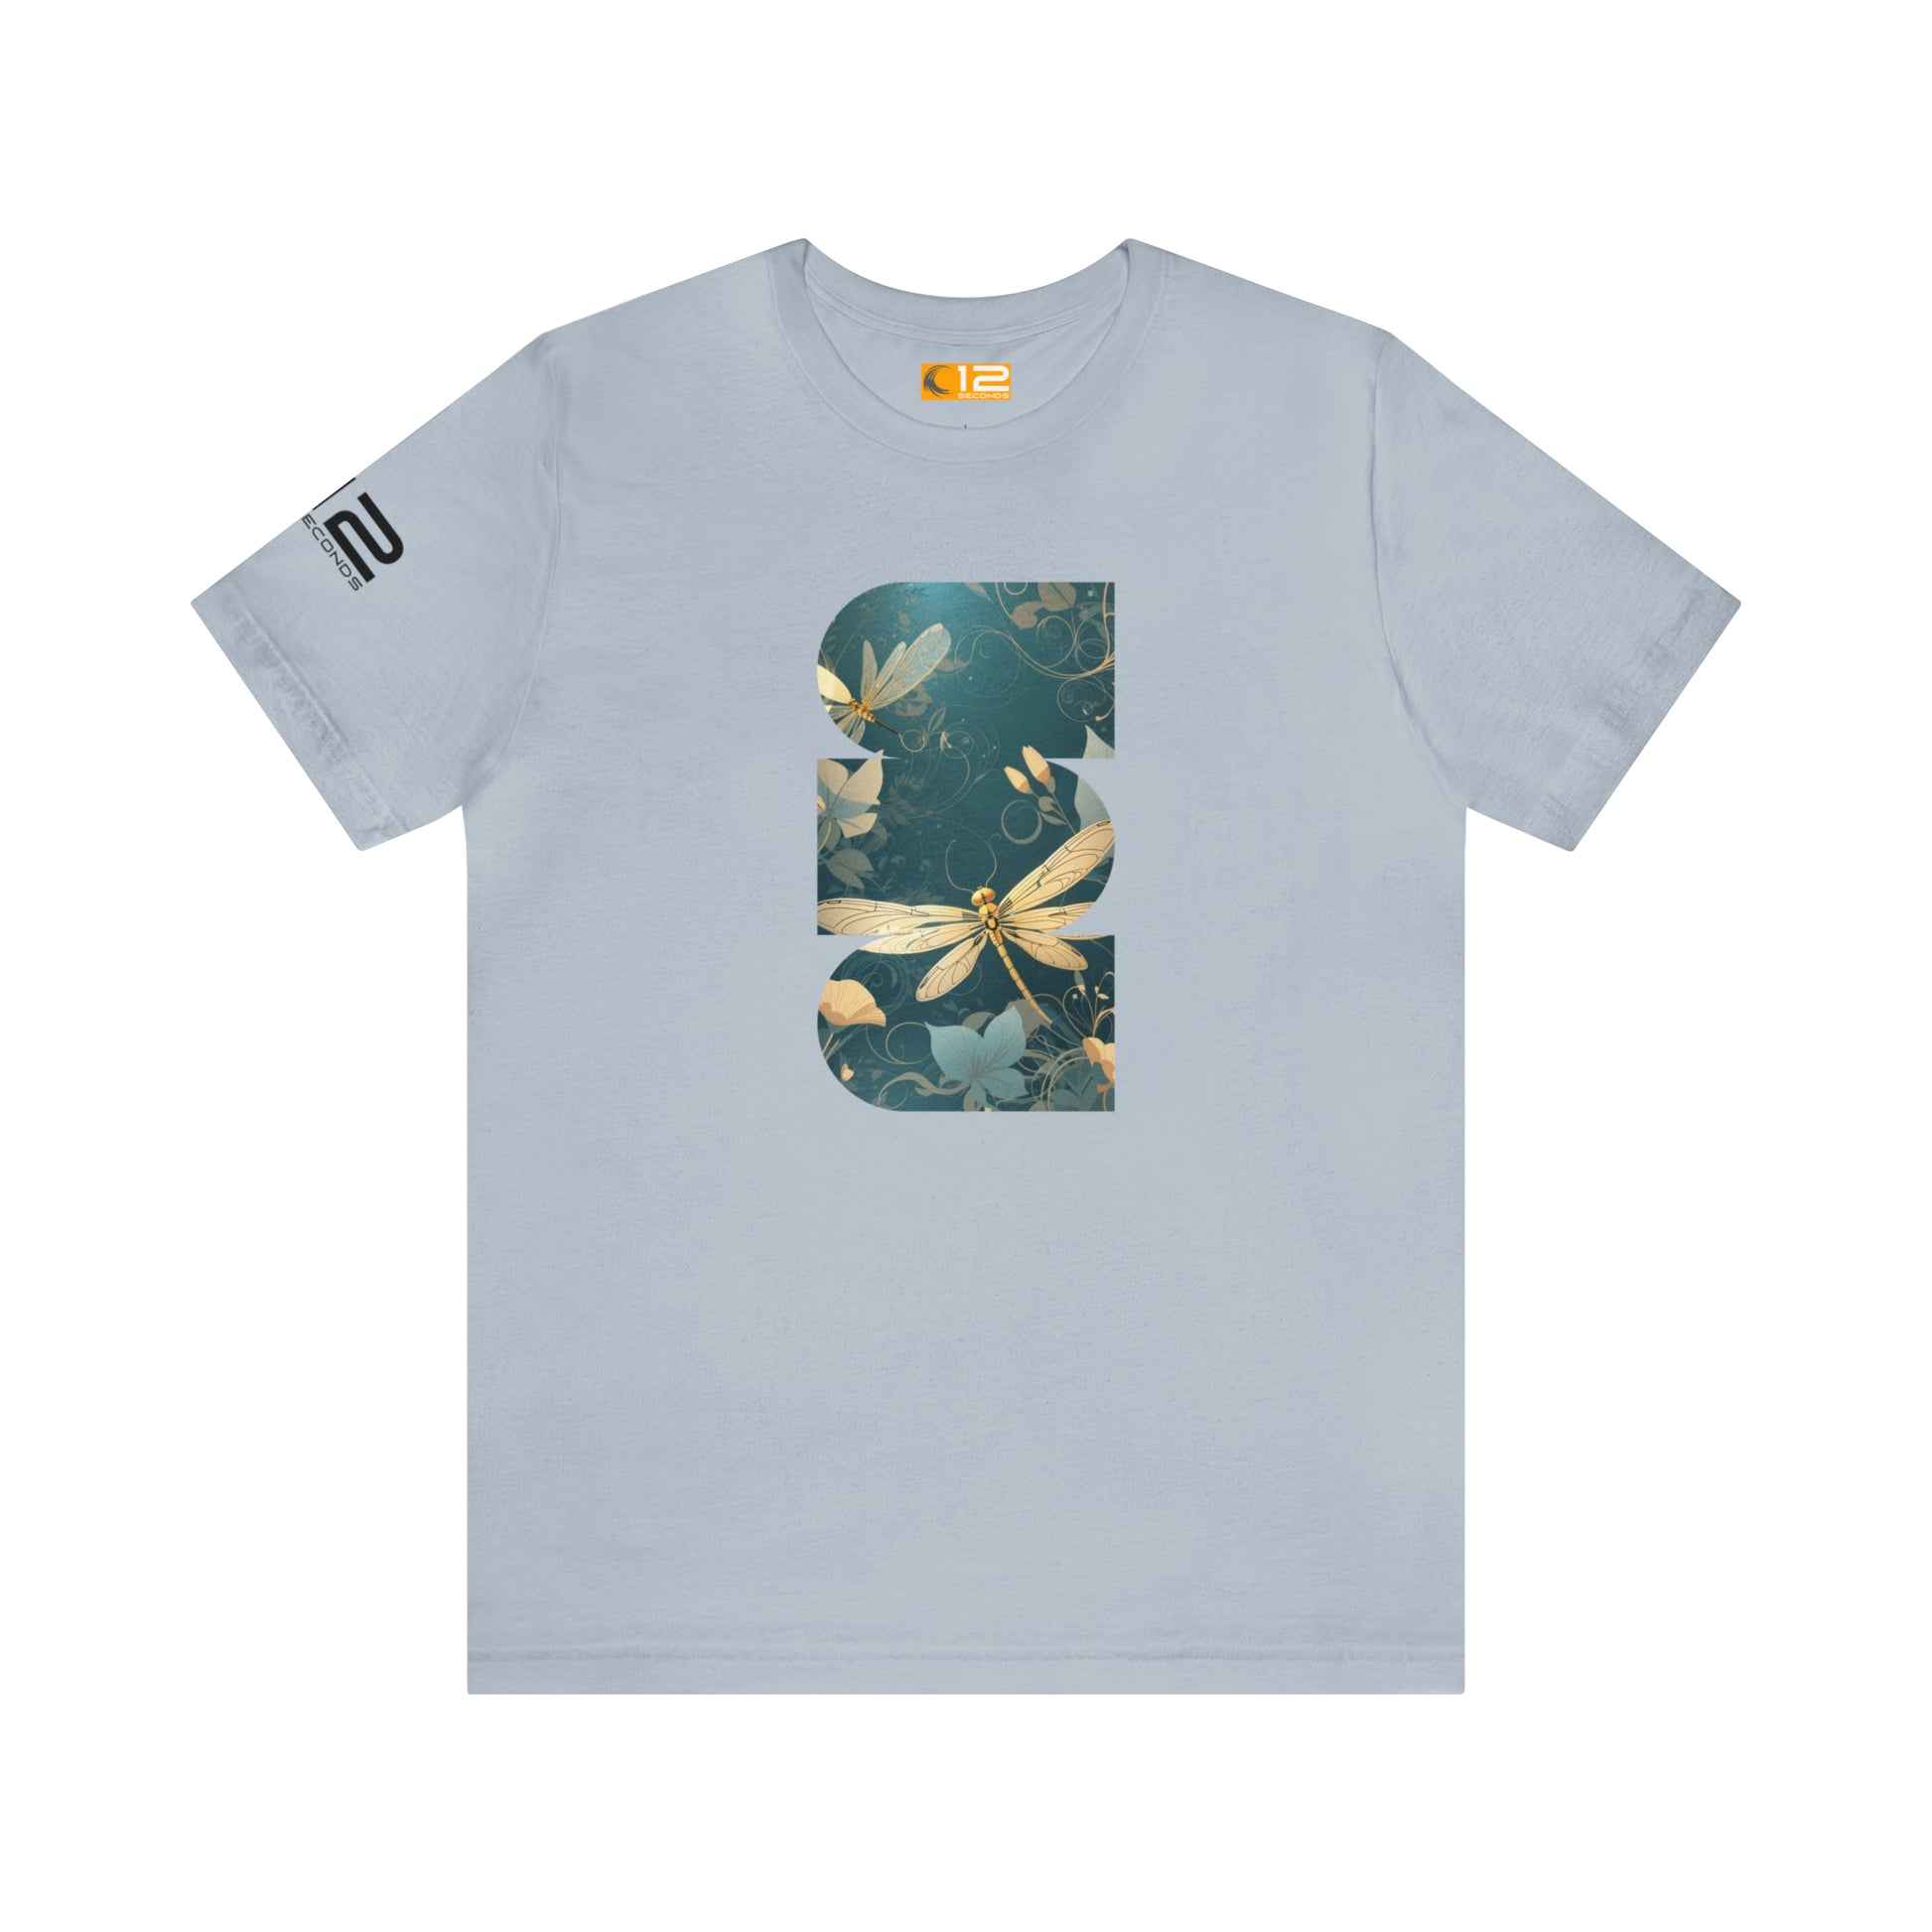 Jersey Short Sleeve Tee - DRAGONFLY UTOPIA - 12 SECONDS APPAREL